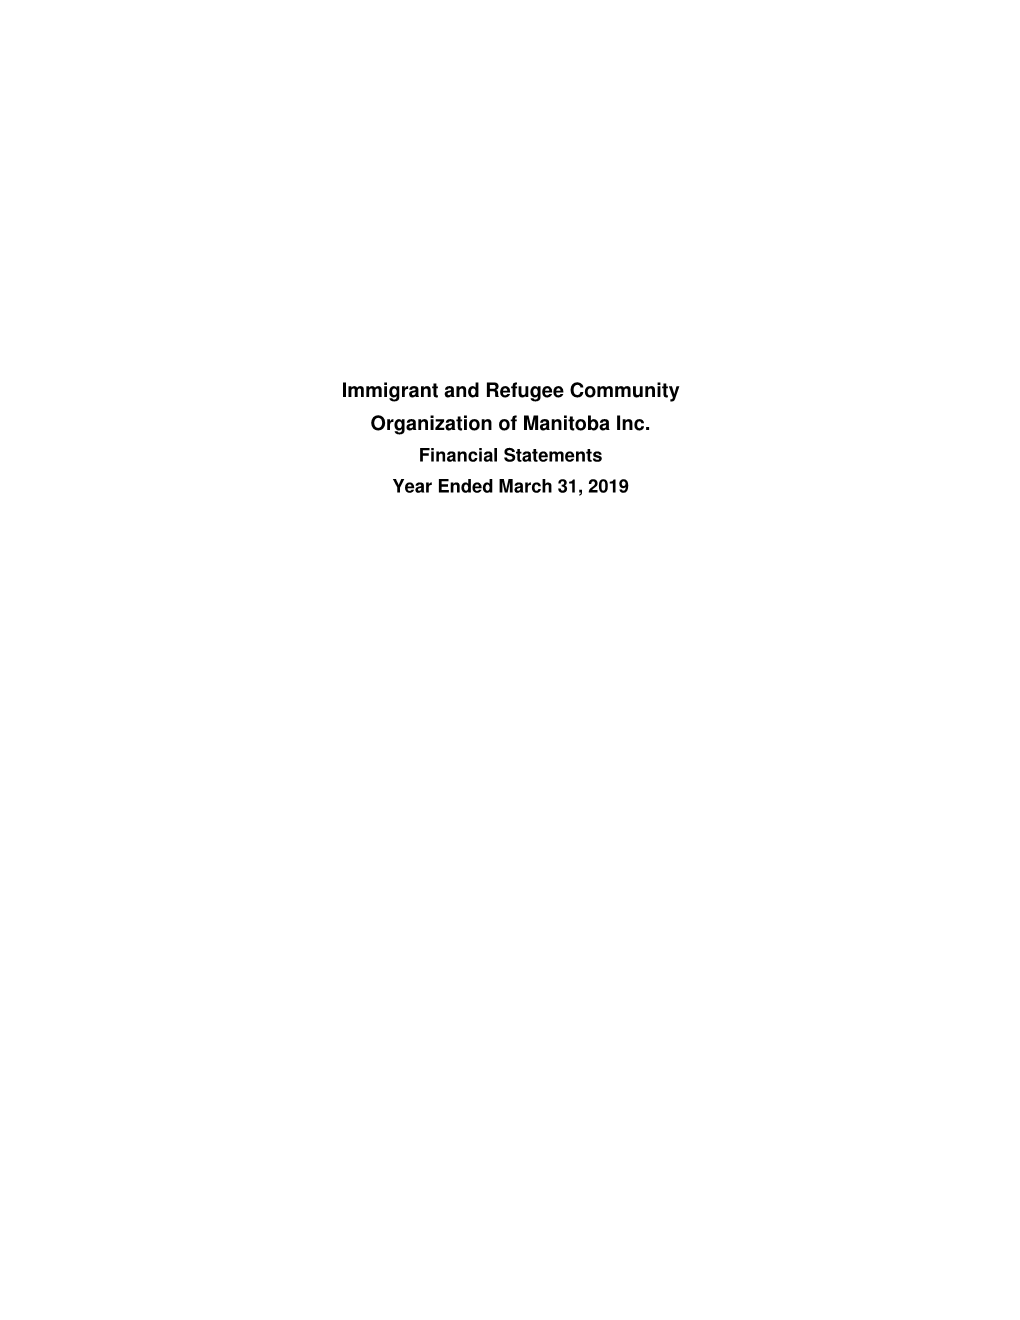 Immigrant and Refugee Community Organization of Manitoba Inc. Financial Statements Year Ended March 31, 2019